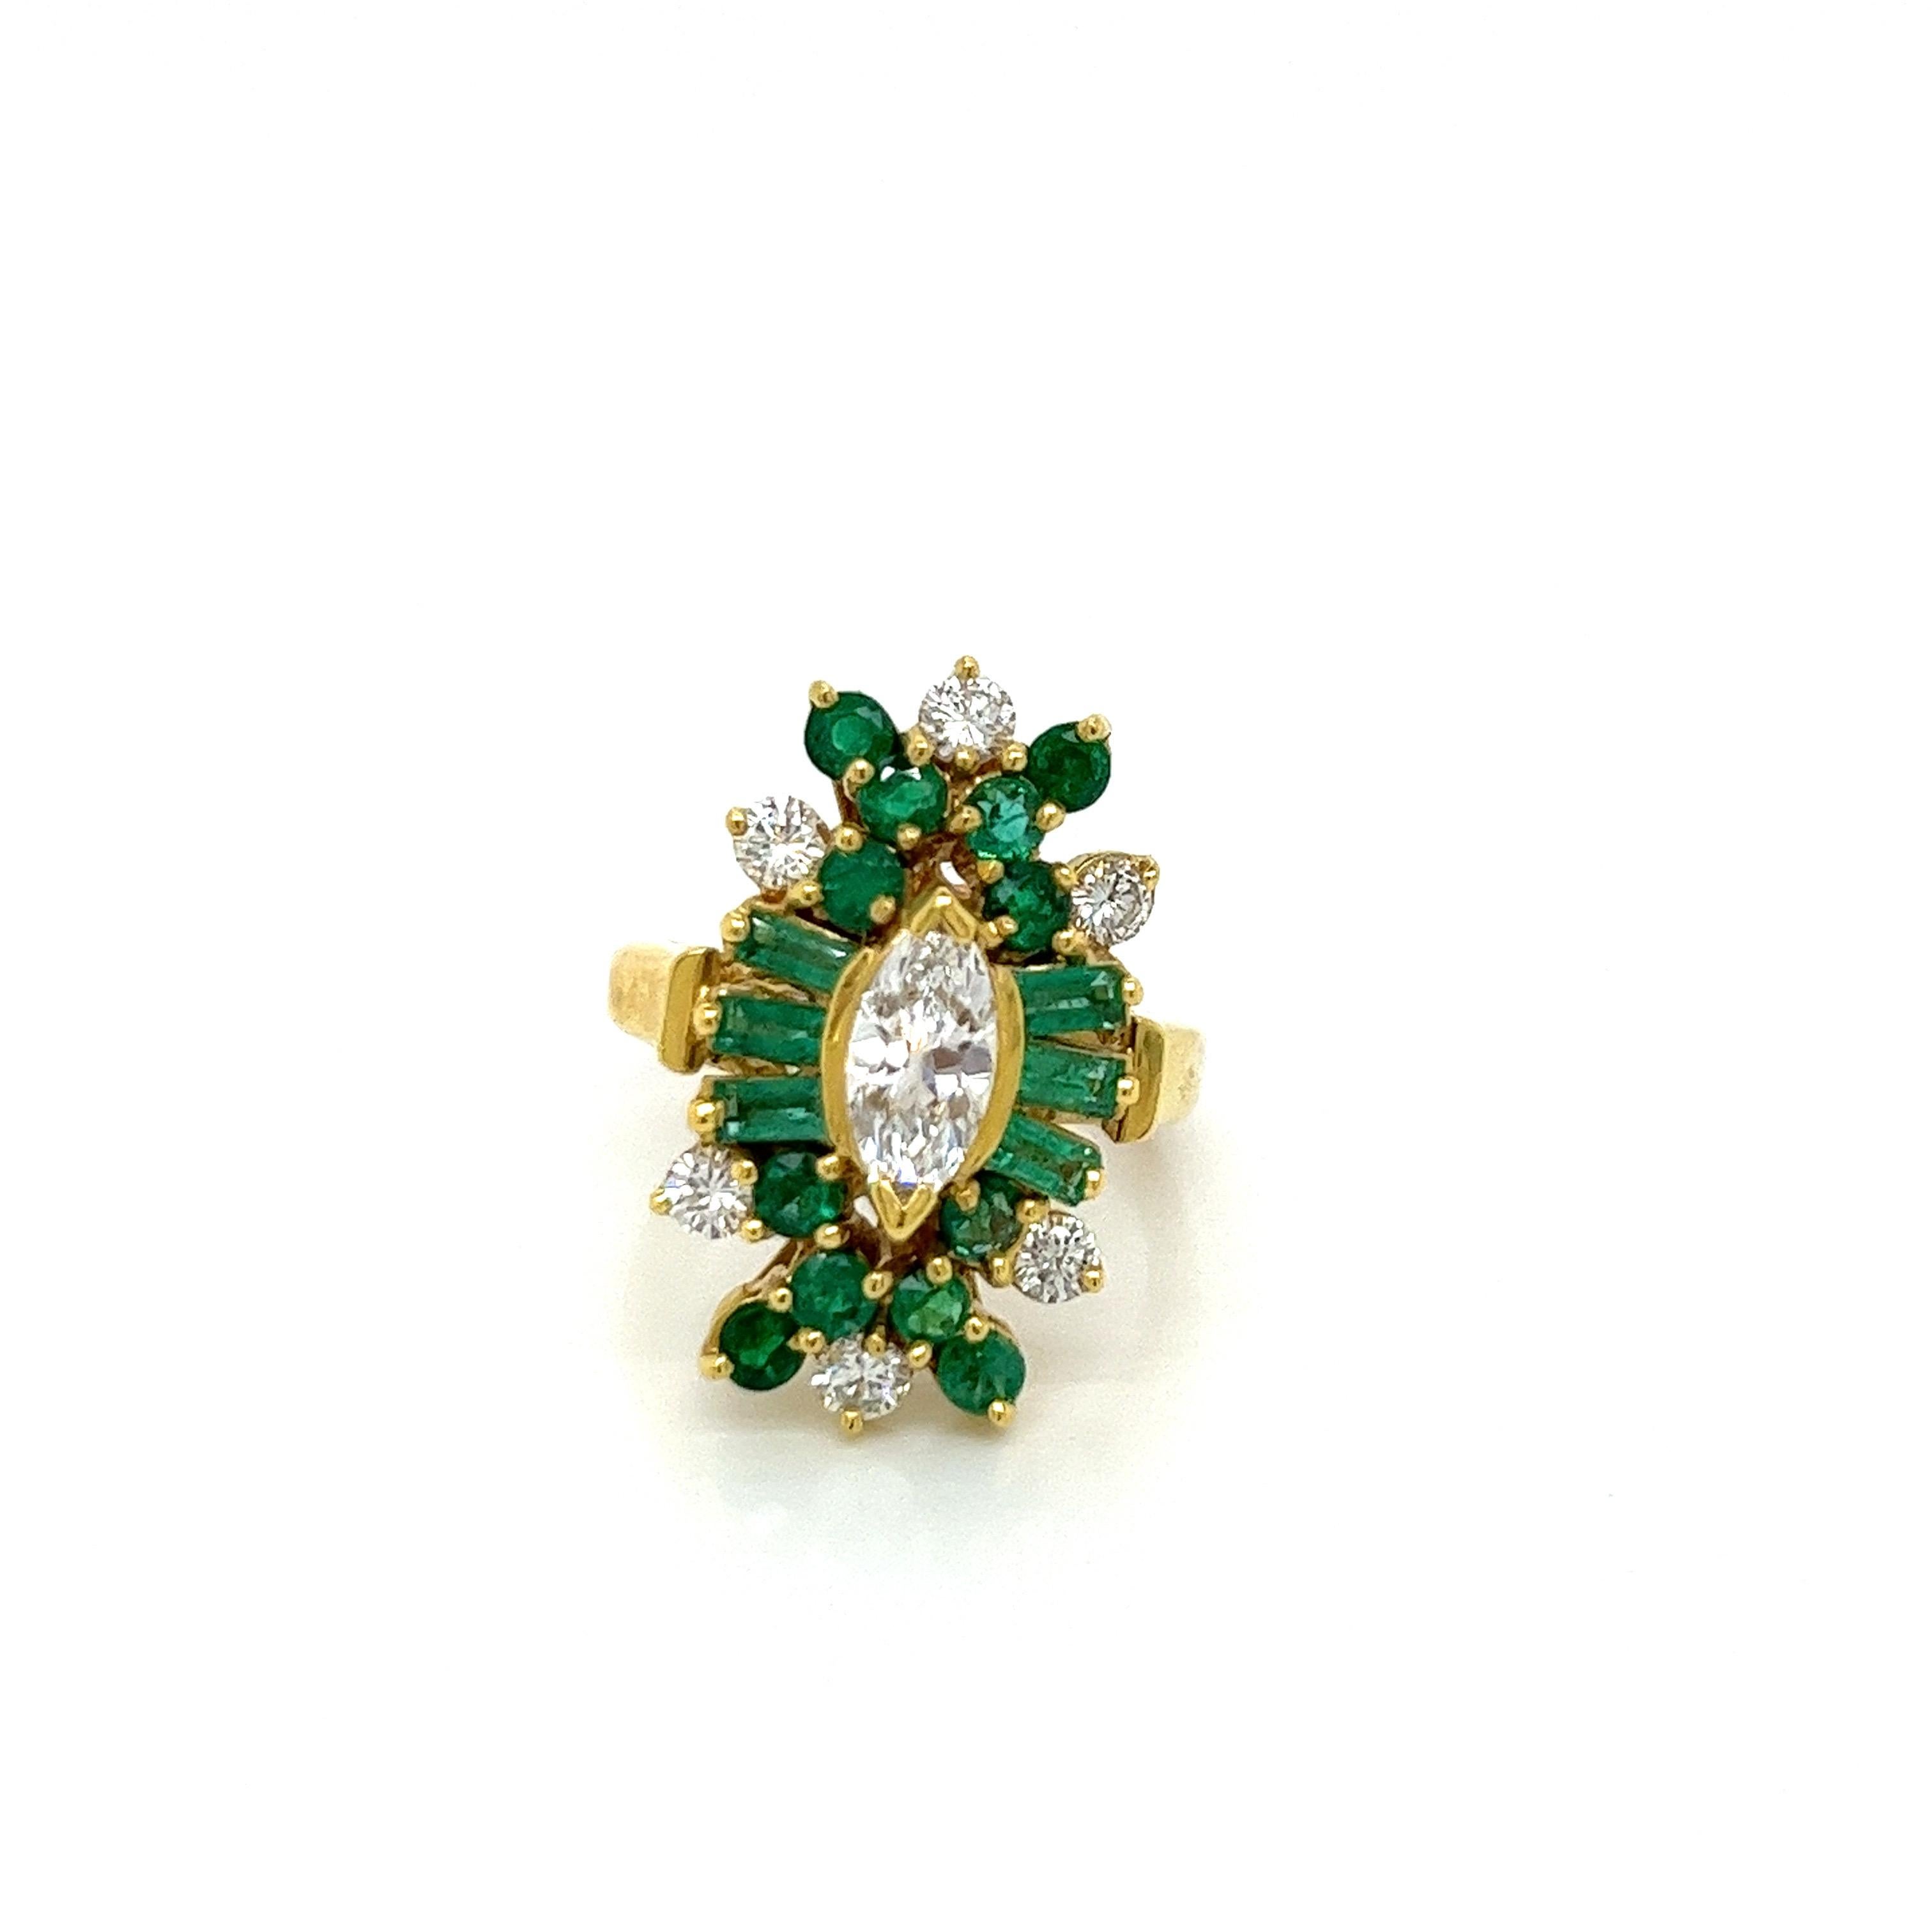 Vintage 18k yellow gold Victorian Reproduction Diamond and Emerald Ring - The center marquise diamond measures 8.5 x 4.2mm and weighs approximately .75ct. The diamond has a quality of F color and SI1 clarity. One either side of the marquise diamond